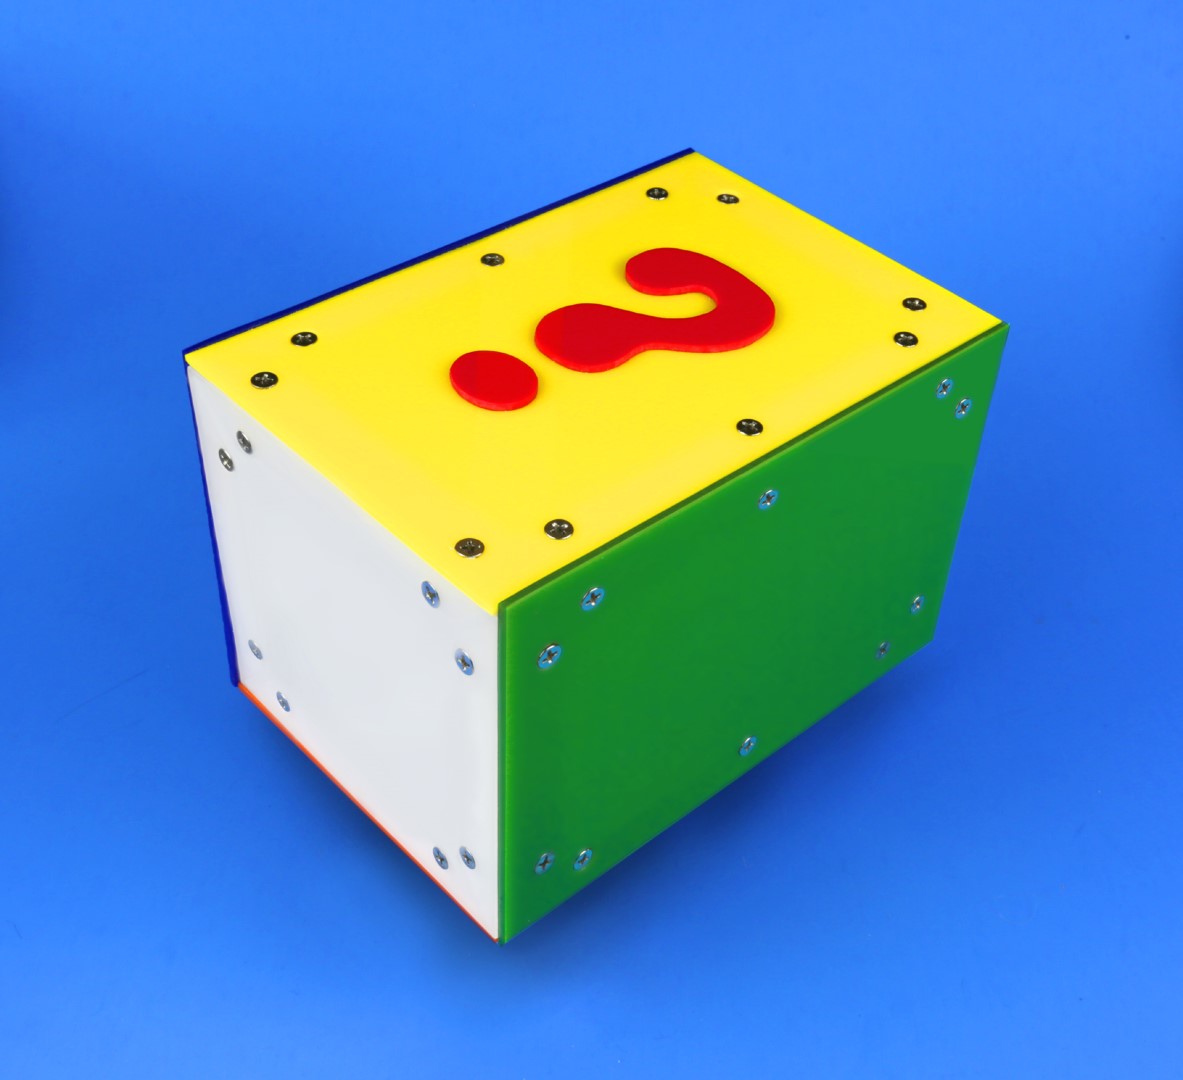 Jumping Mystery Box: Learn Simple Circuits To Detect Motion And Sound